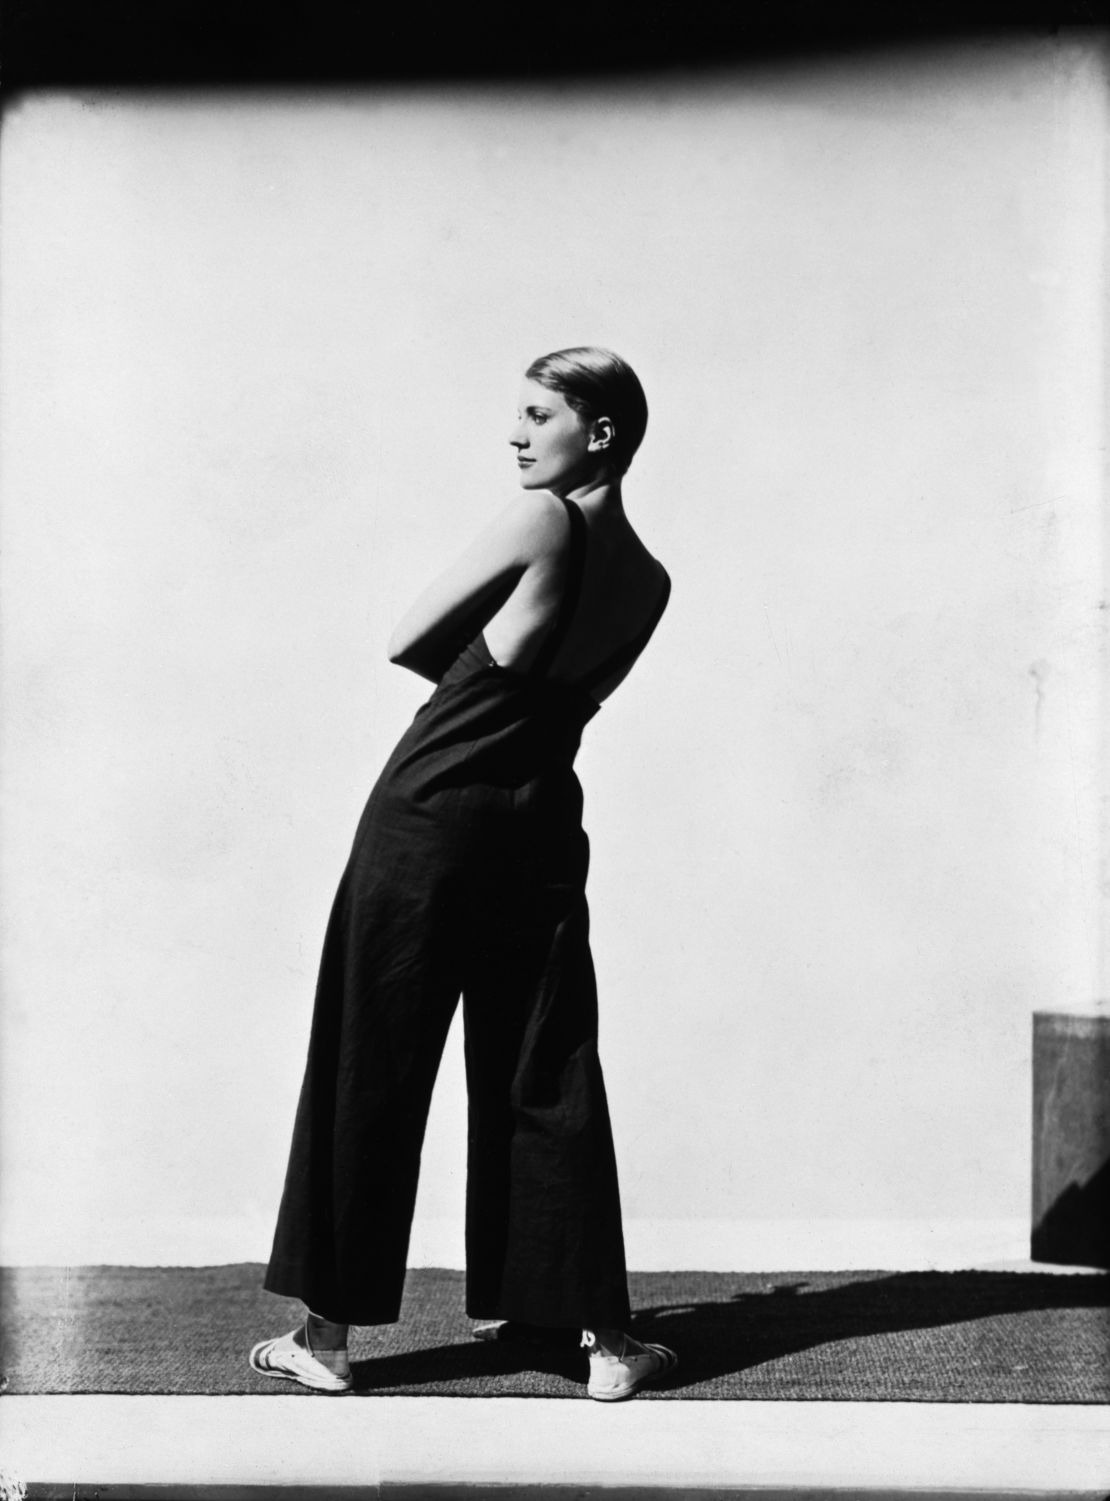 This image of Lee Miller from 1930 wouldn't look out of place in a fashion magazine today.